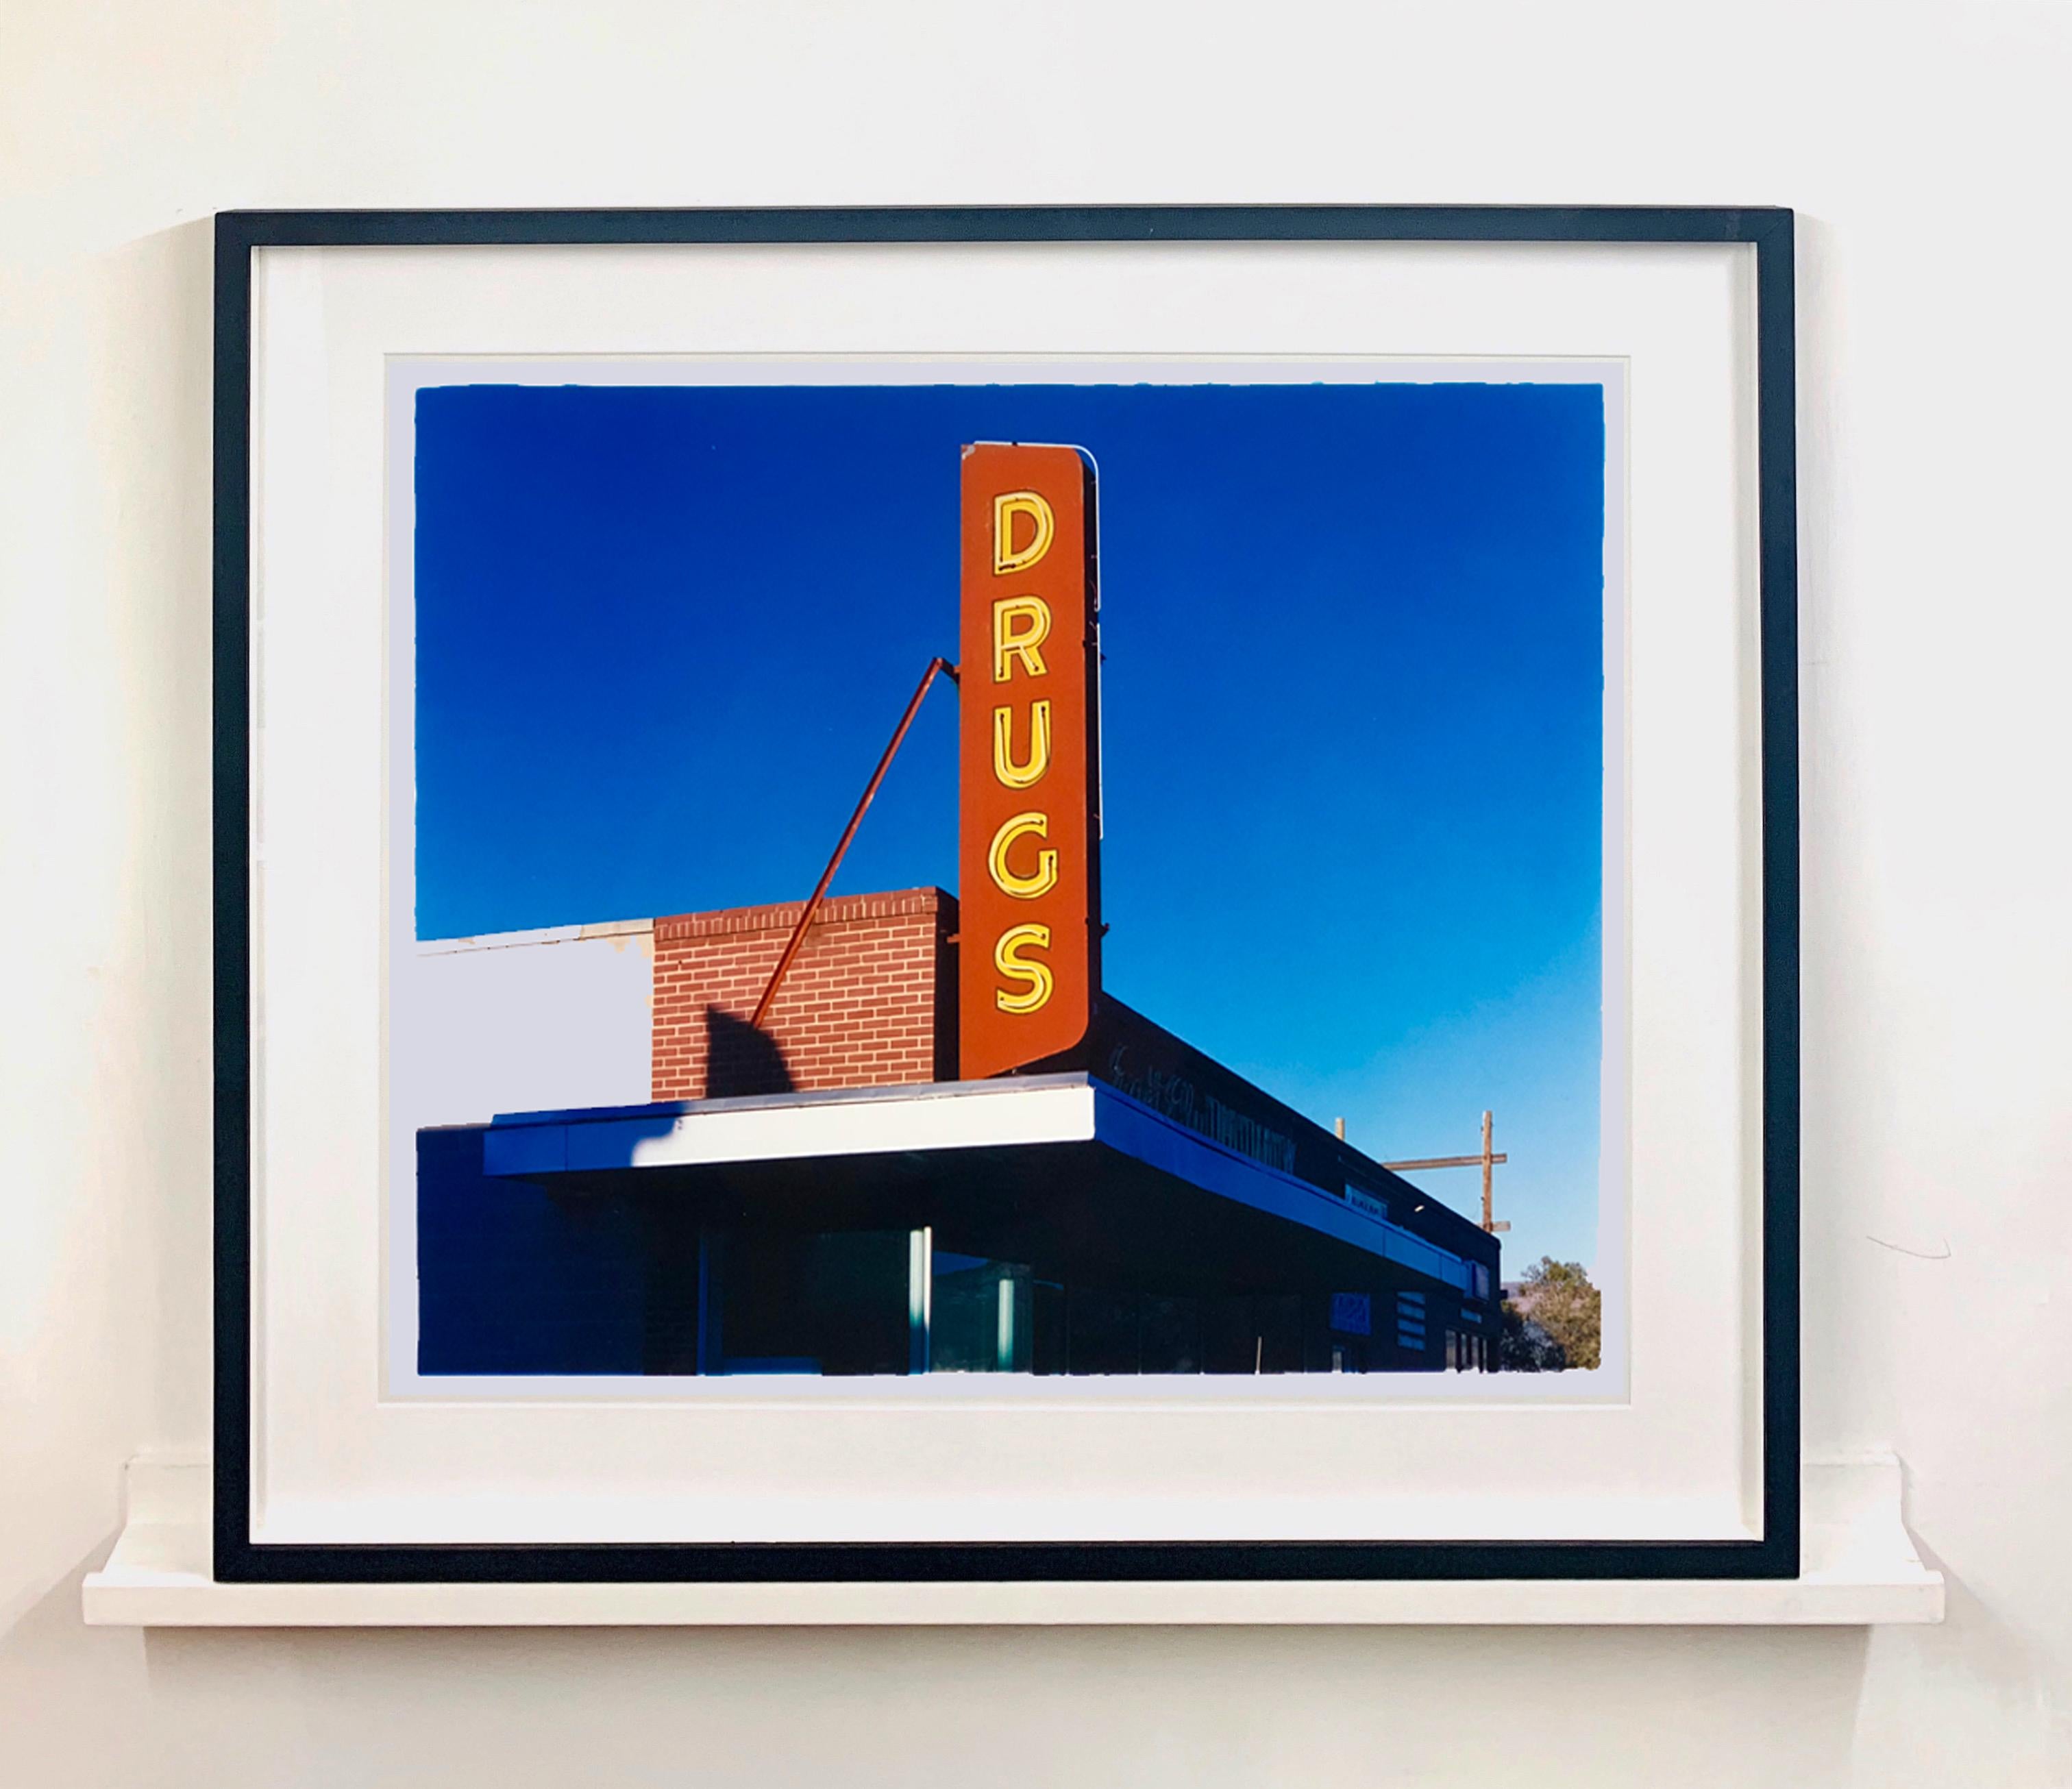 'Drug Store', Ely, Nevada - After the Gold Rush Series - Pop Art Color Photo - Photograph by Richard Heeps